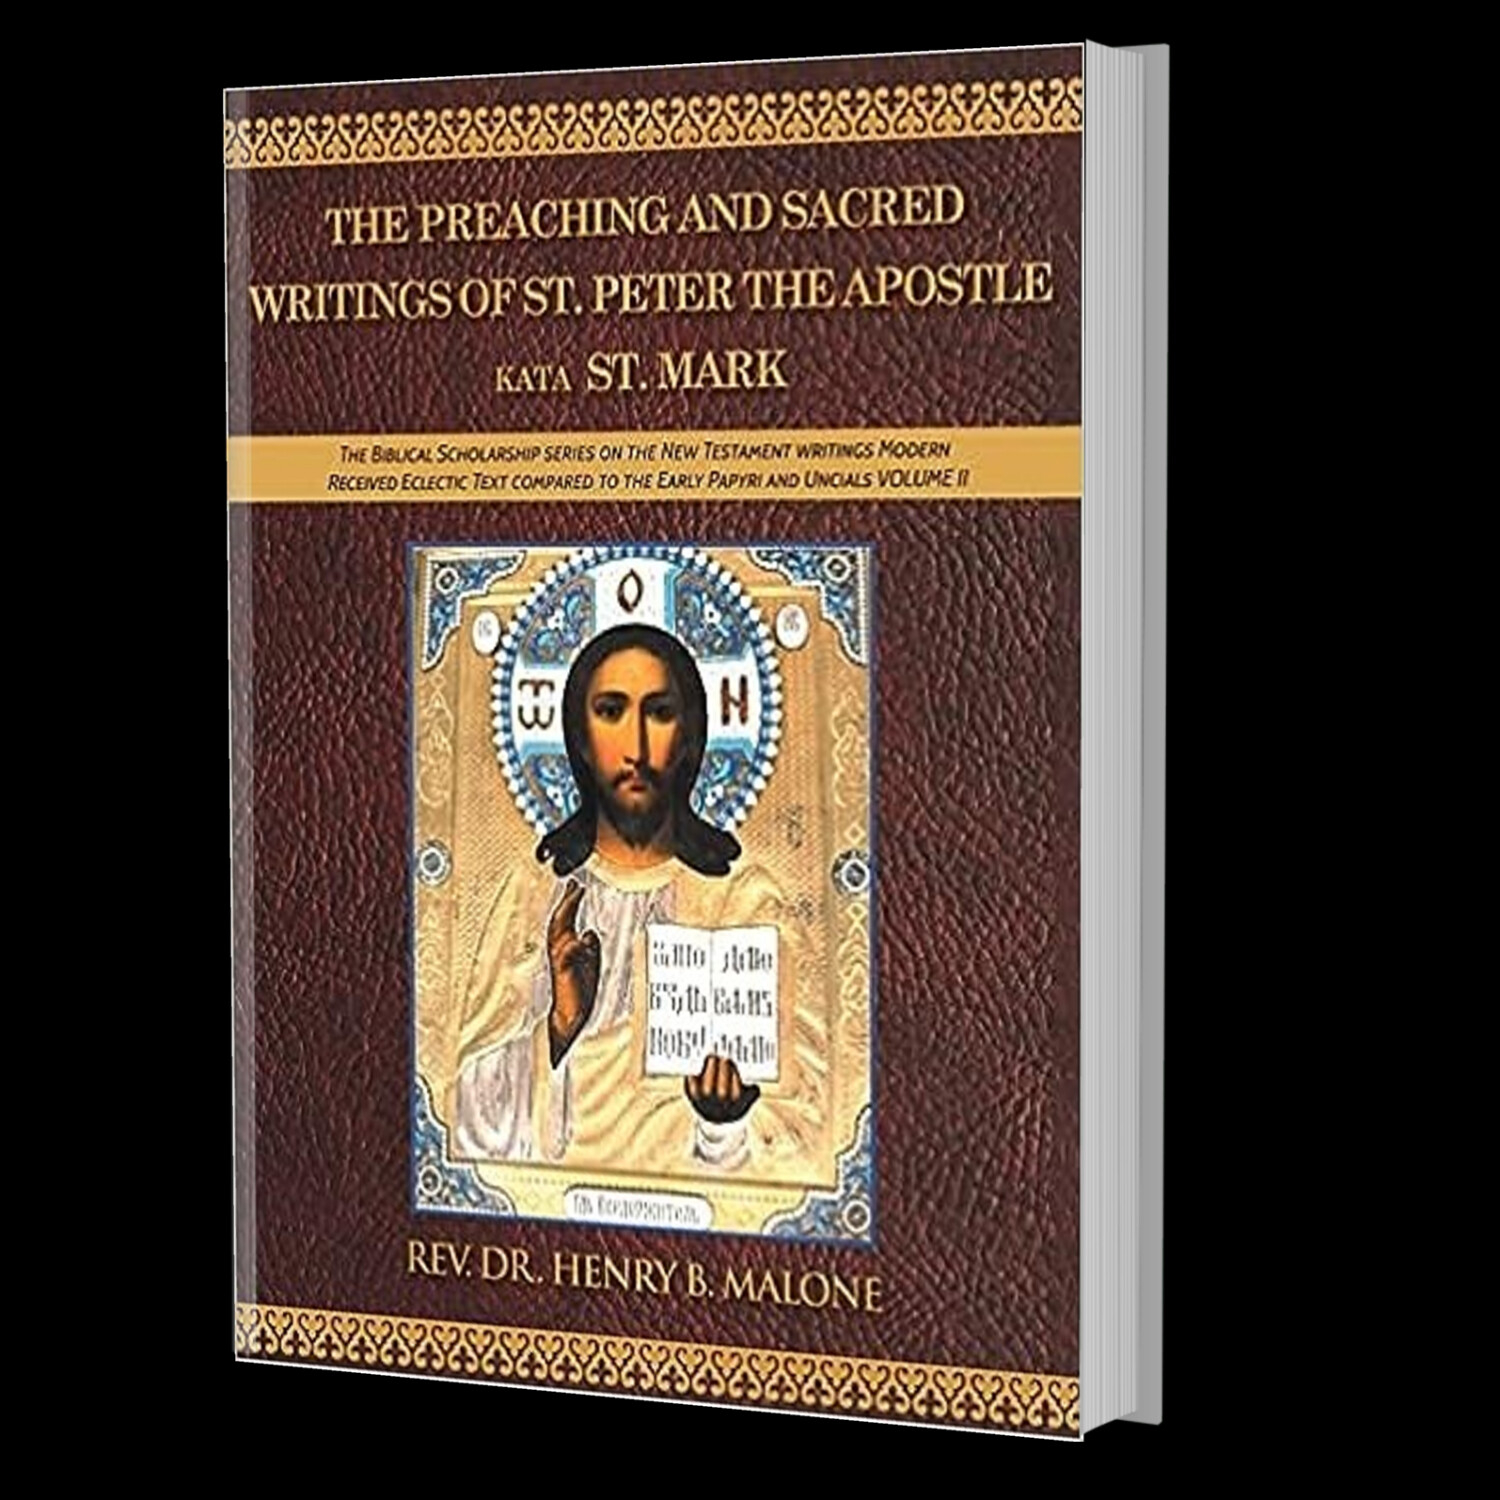 The Preaching and Sacred Writings of St. Peter the Apostle Kata St. Mark The Biblical Scholarship series on the New Testament writings Modern Received Eclectic Text compared to the Early Papyri and Uncials VOLUME II